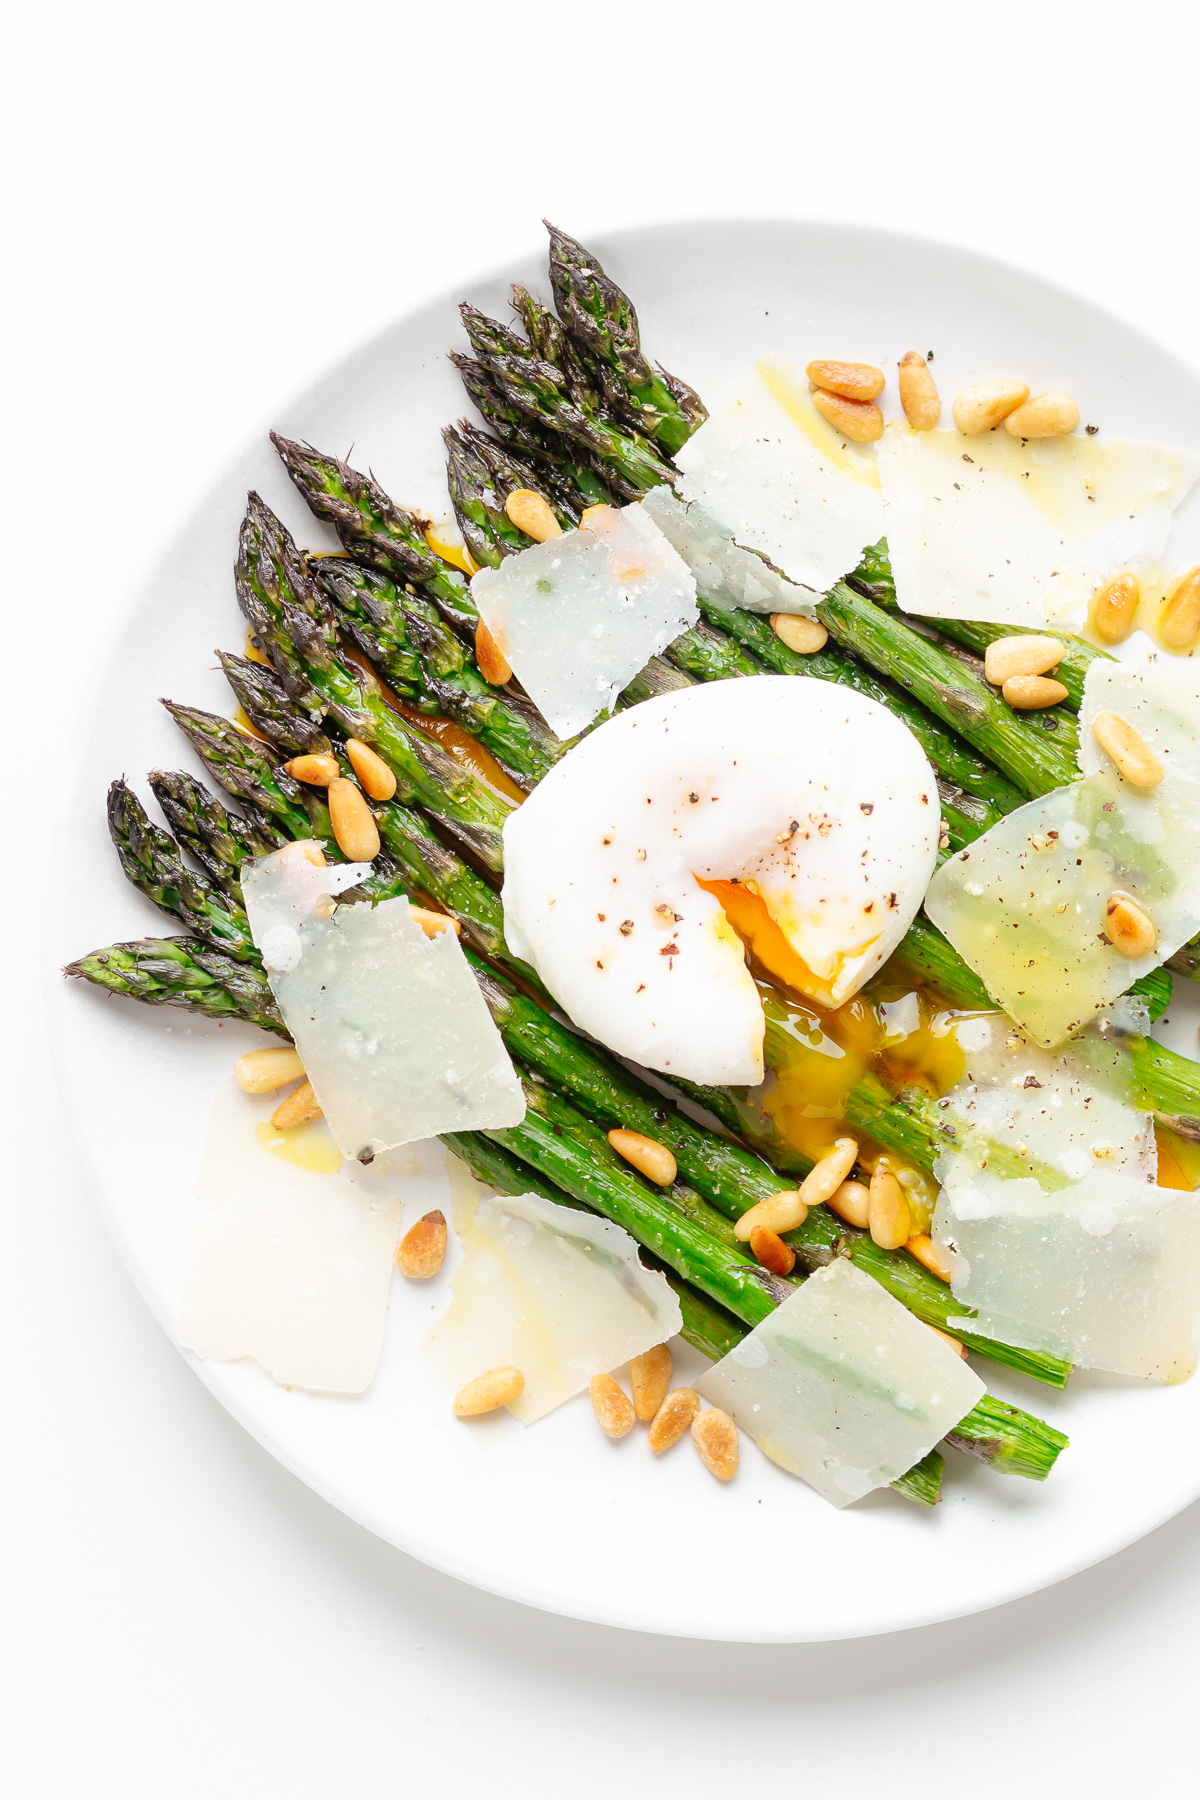 Roasted asparagus on a white plate topped with a poached egg, parmesan shavings, pine nuts, drizzle of olive oil and salt and pepper.